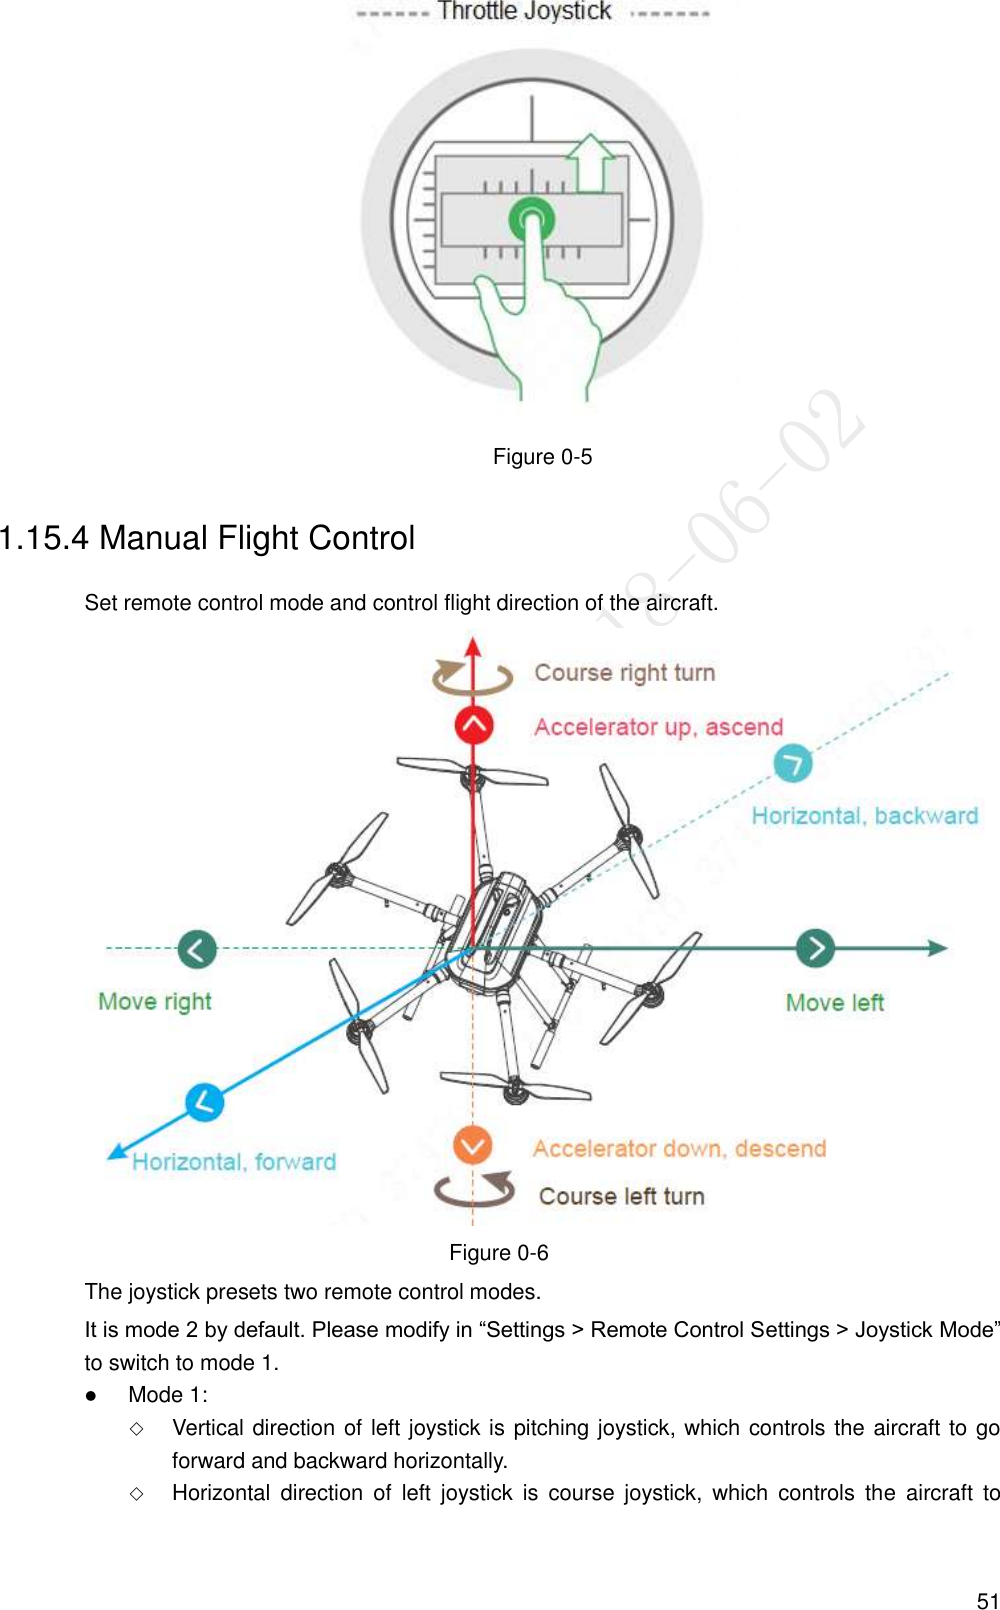  51  Figure 0-5 1.15.4 Manual Flight Control Set remote control mode and control flight direction of the aircraft.  Figure 0-6 The joystick presets two remote control modes. It is mode 2 by default. Please modify in “Settings &gt; Remote Control Settings &gt; Joystick Mode” to switch to mode 1.  Mode 1:  Vertical direction of left joystick is pitching joystick, which controls the aircraft to go forward and backward horizontally.  Horizontal  direction  of  left  joystick  is  course  joystick,  which  controls  the  aircraft  to 